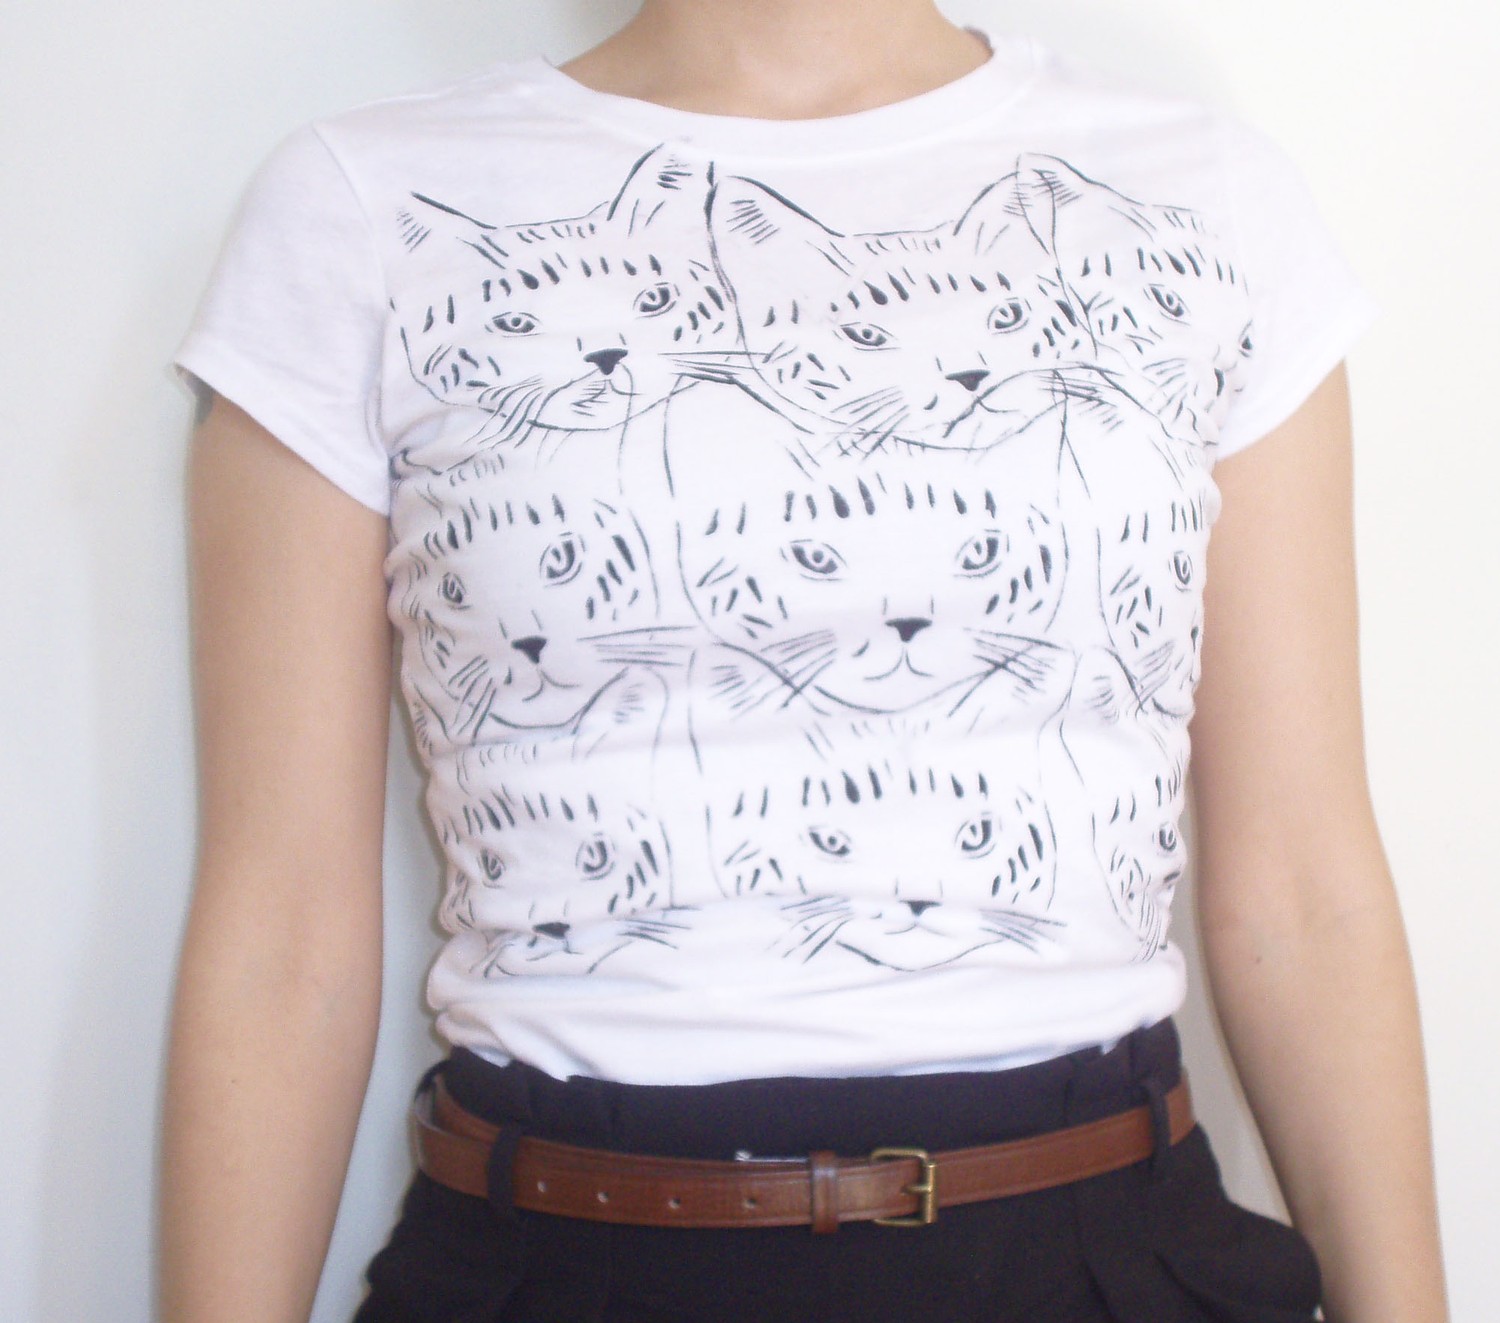 Catsparella: EM By Miri Hand Printed Kitty Tee and Tote Giveaway!